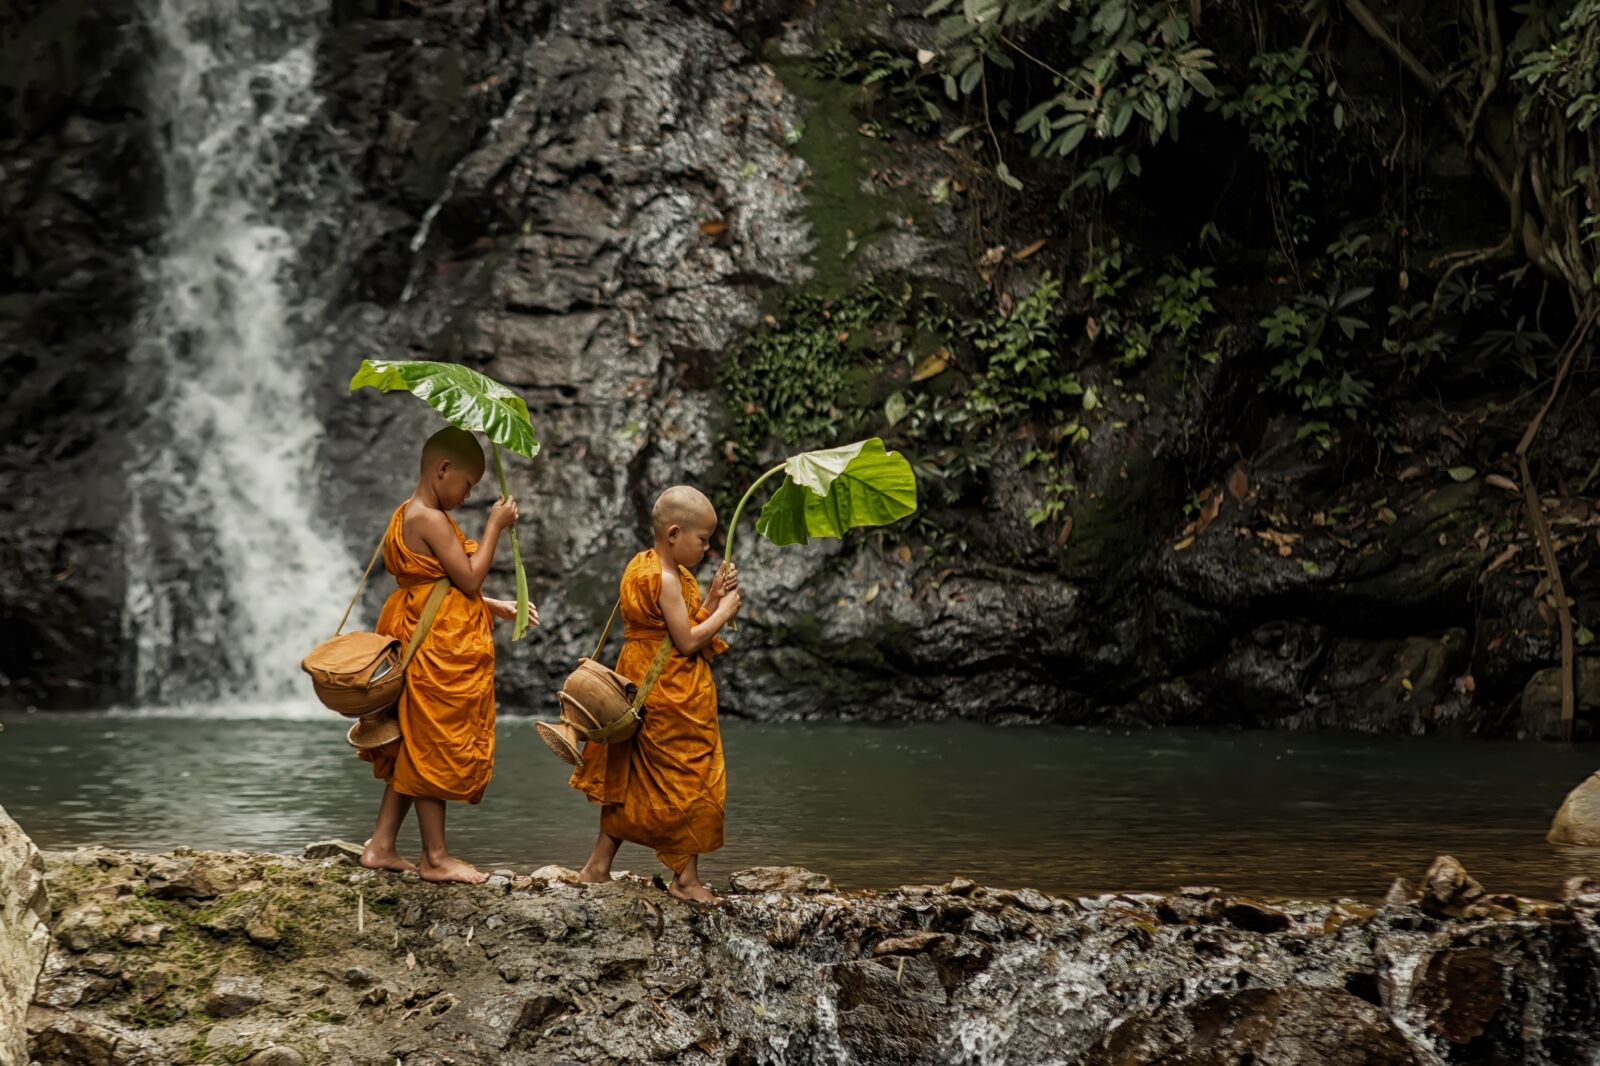 Dramatic moment of a little boy monk.Walking in nature in Asia,Novice monk at Luang Prabang,Laos.